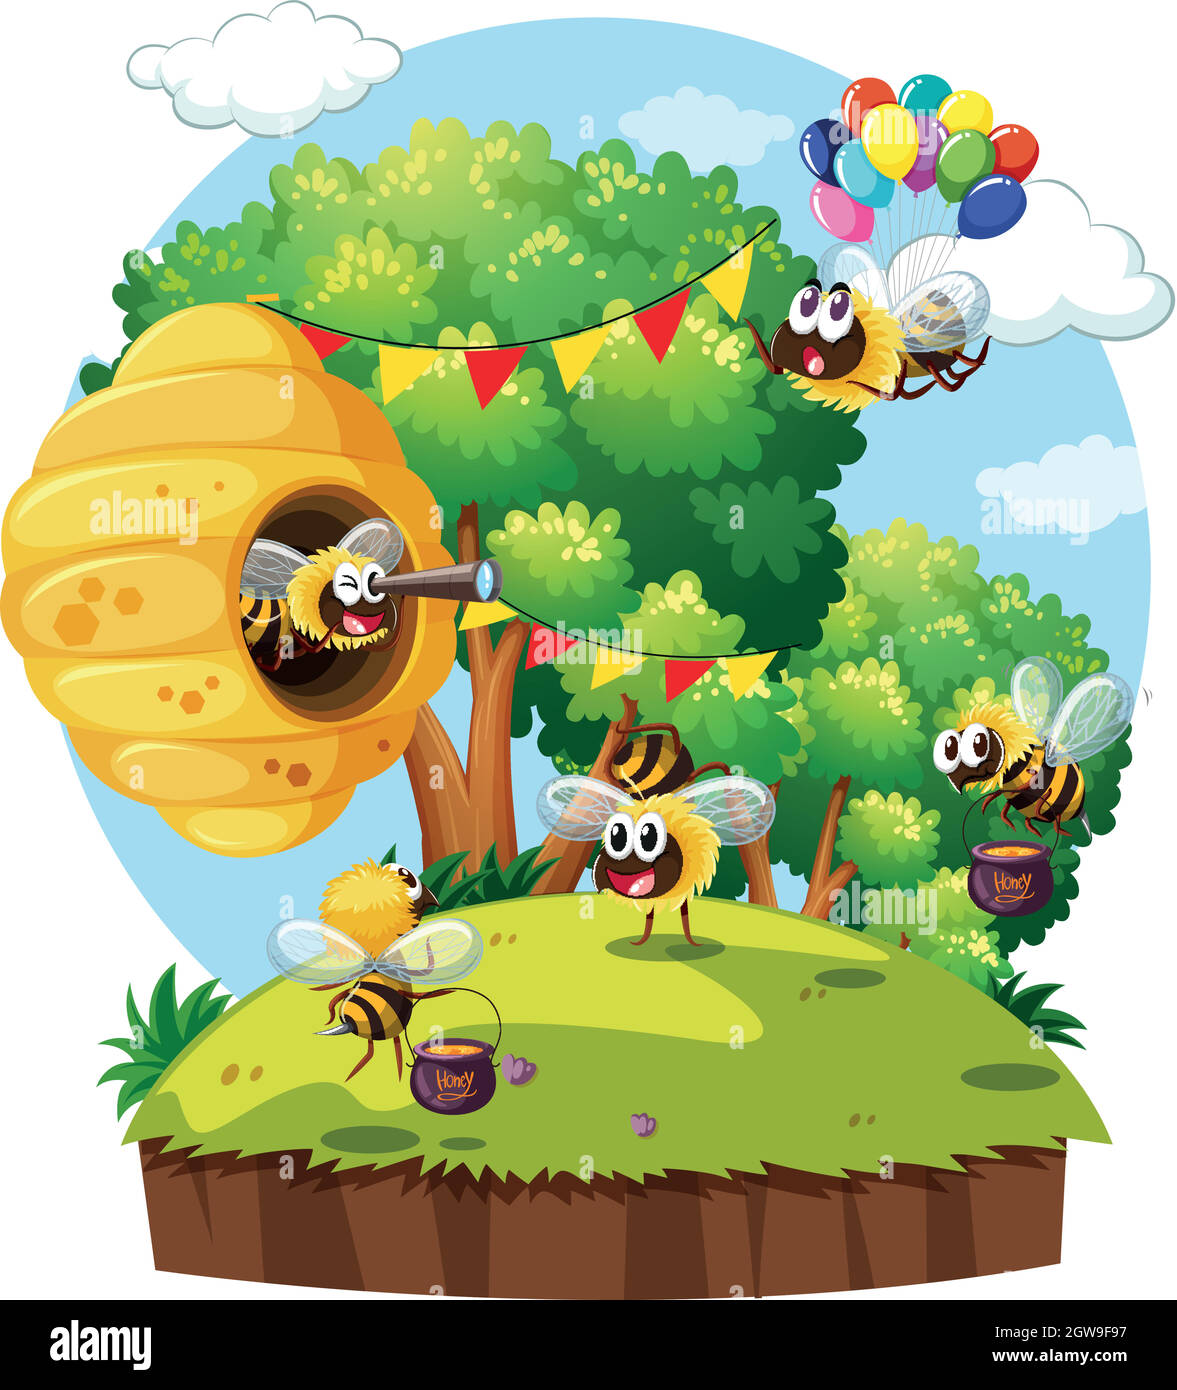 Park scene with bees flying Stock Vector